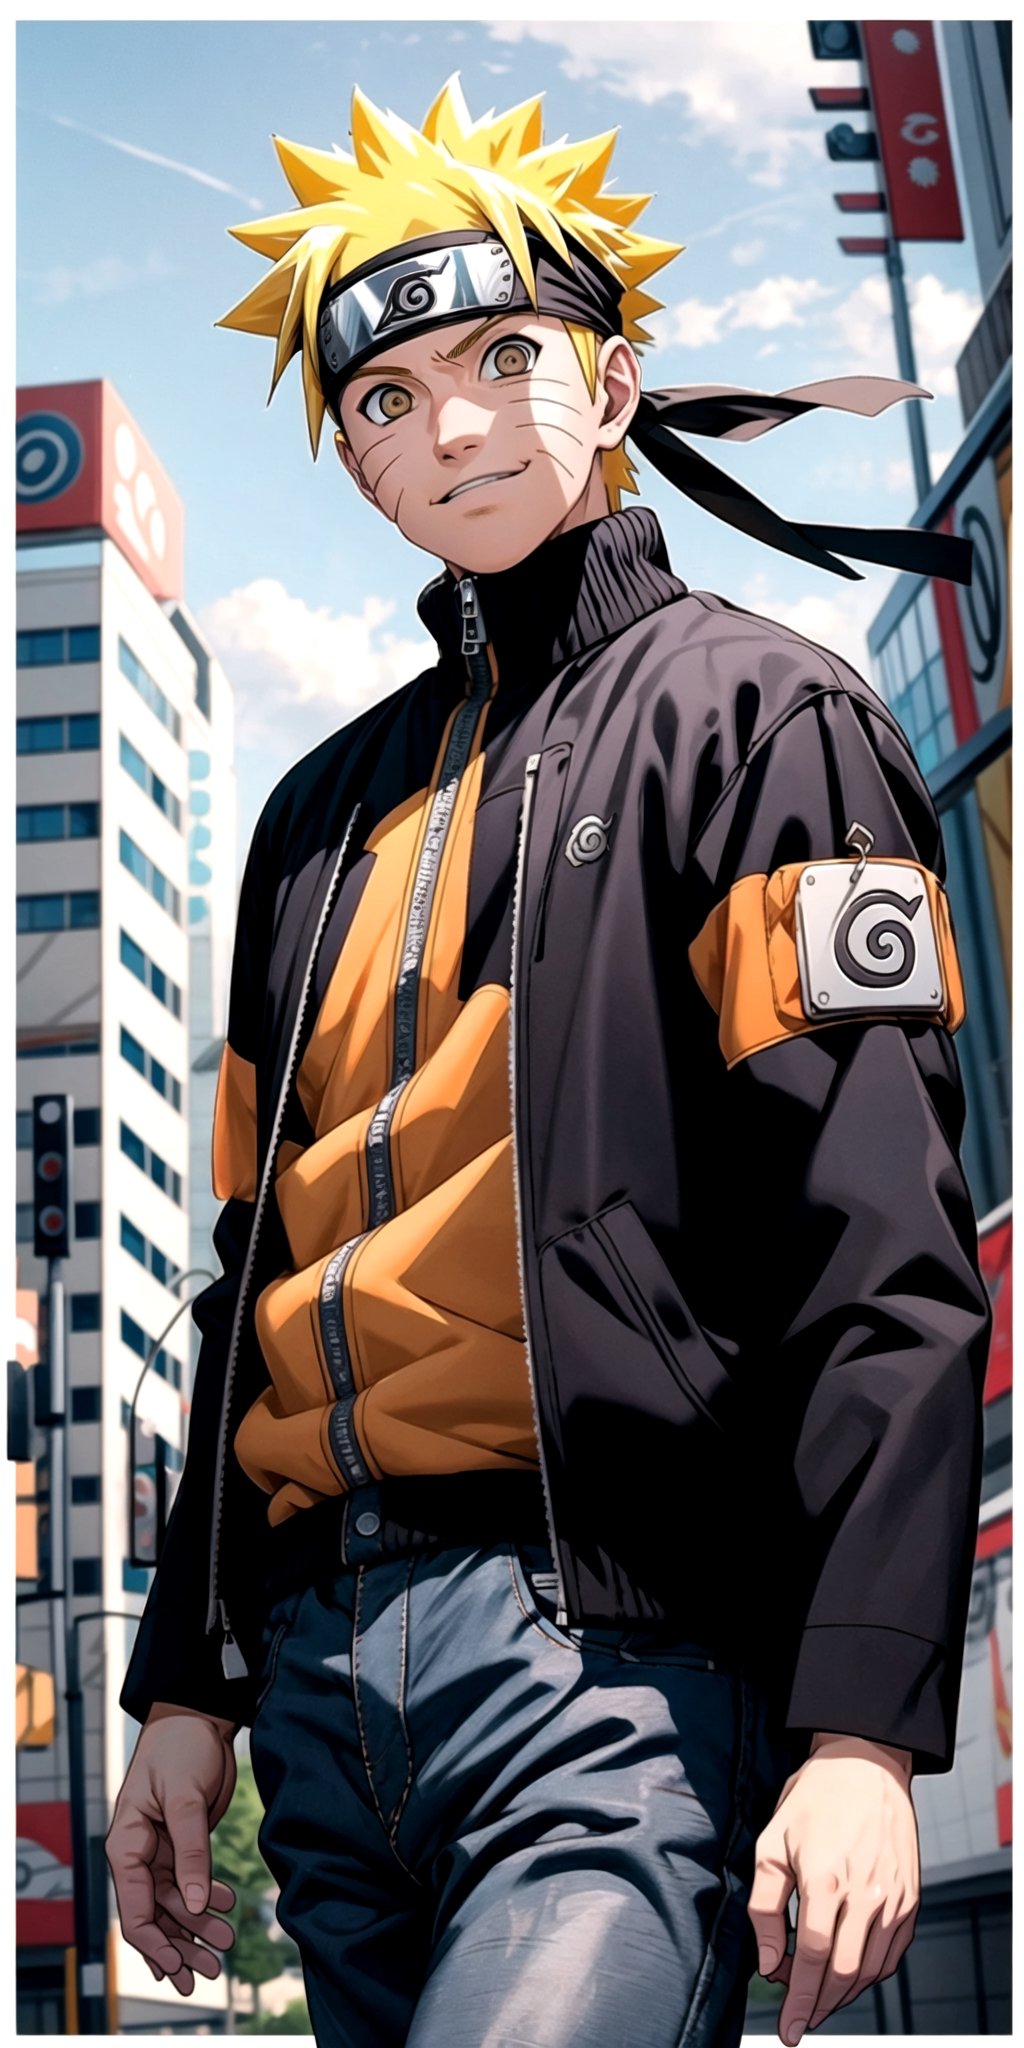 Create a super high detailed image of Naruto uzumaki with yellow spiky hair brown eyes, lite smile on his face lite muscular body wearing black jacket denim pant wearing ninja headband sunglasses, walking on city road, super realistic image of Naruto uzumaki, 32k Ultra HDR high quality image, masterpiece ,FFIXBG